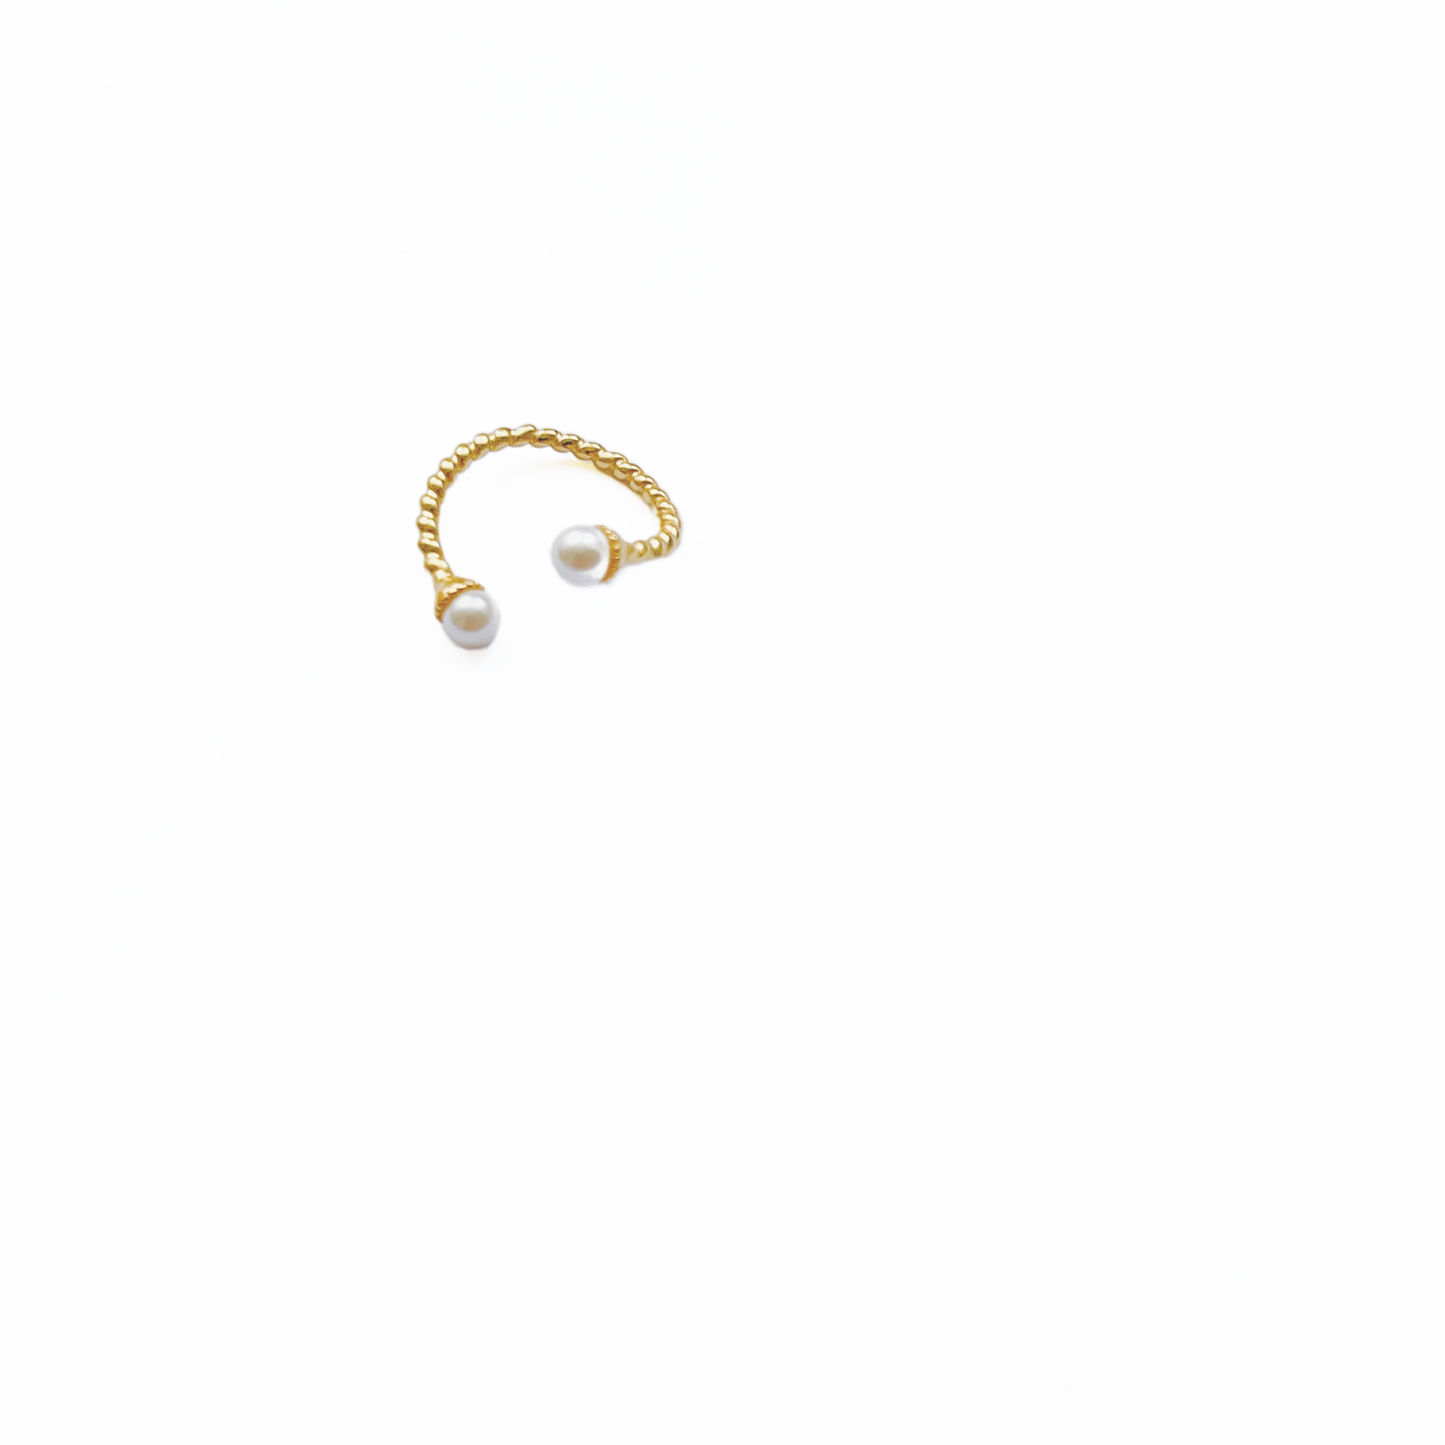 Simply golden twisted ring with pearls or without pearl by Hikaru Pearl